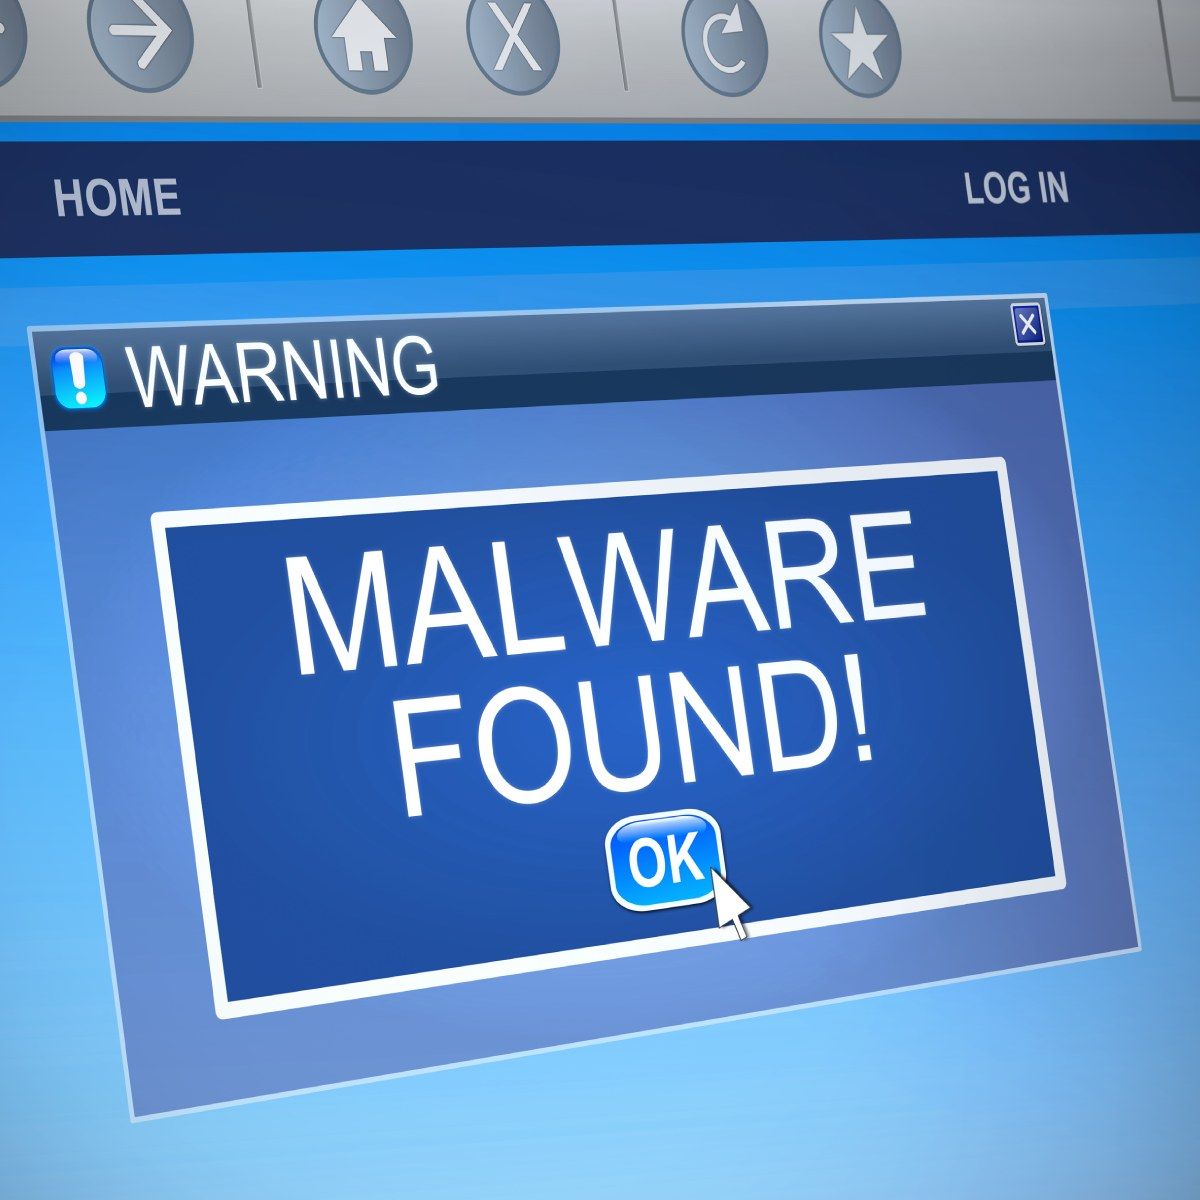 An illustration of a browser window with a pop-uo that says warning, malware found!